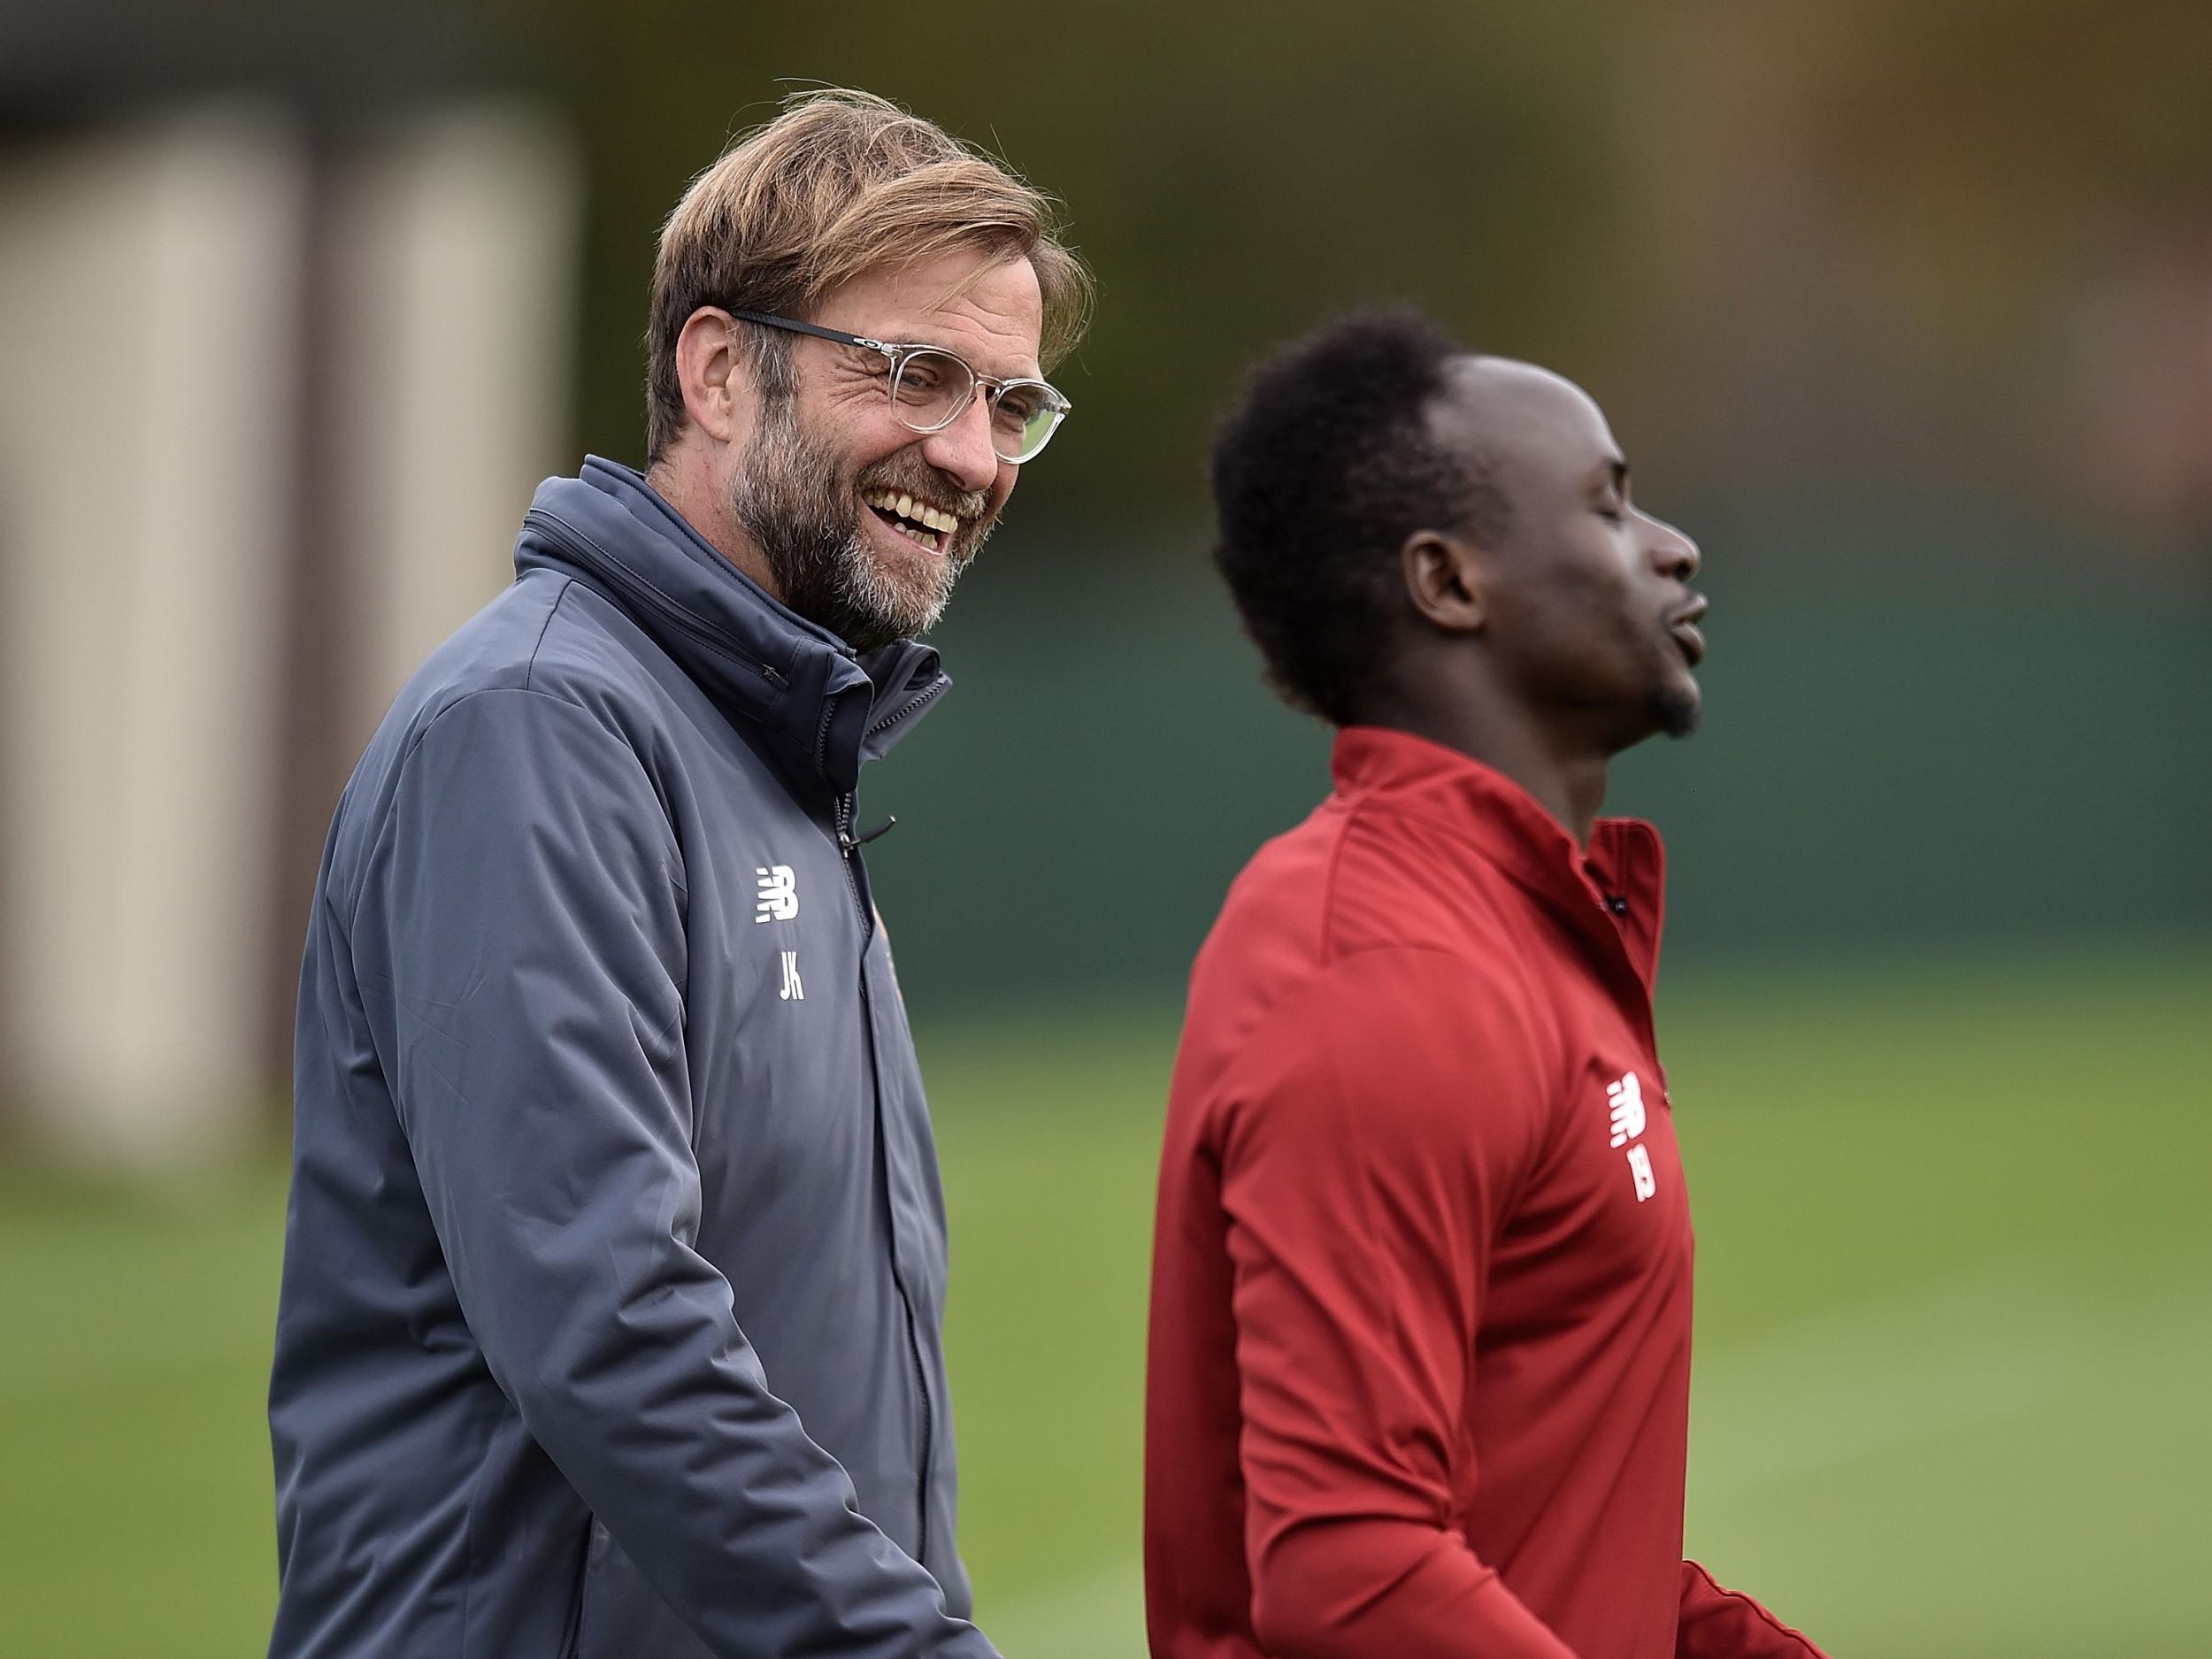 Liverpool manager Jurgen Klopp may be able to call on Sadio Mané's services again